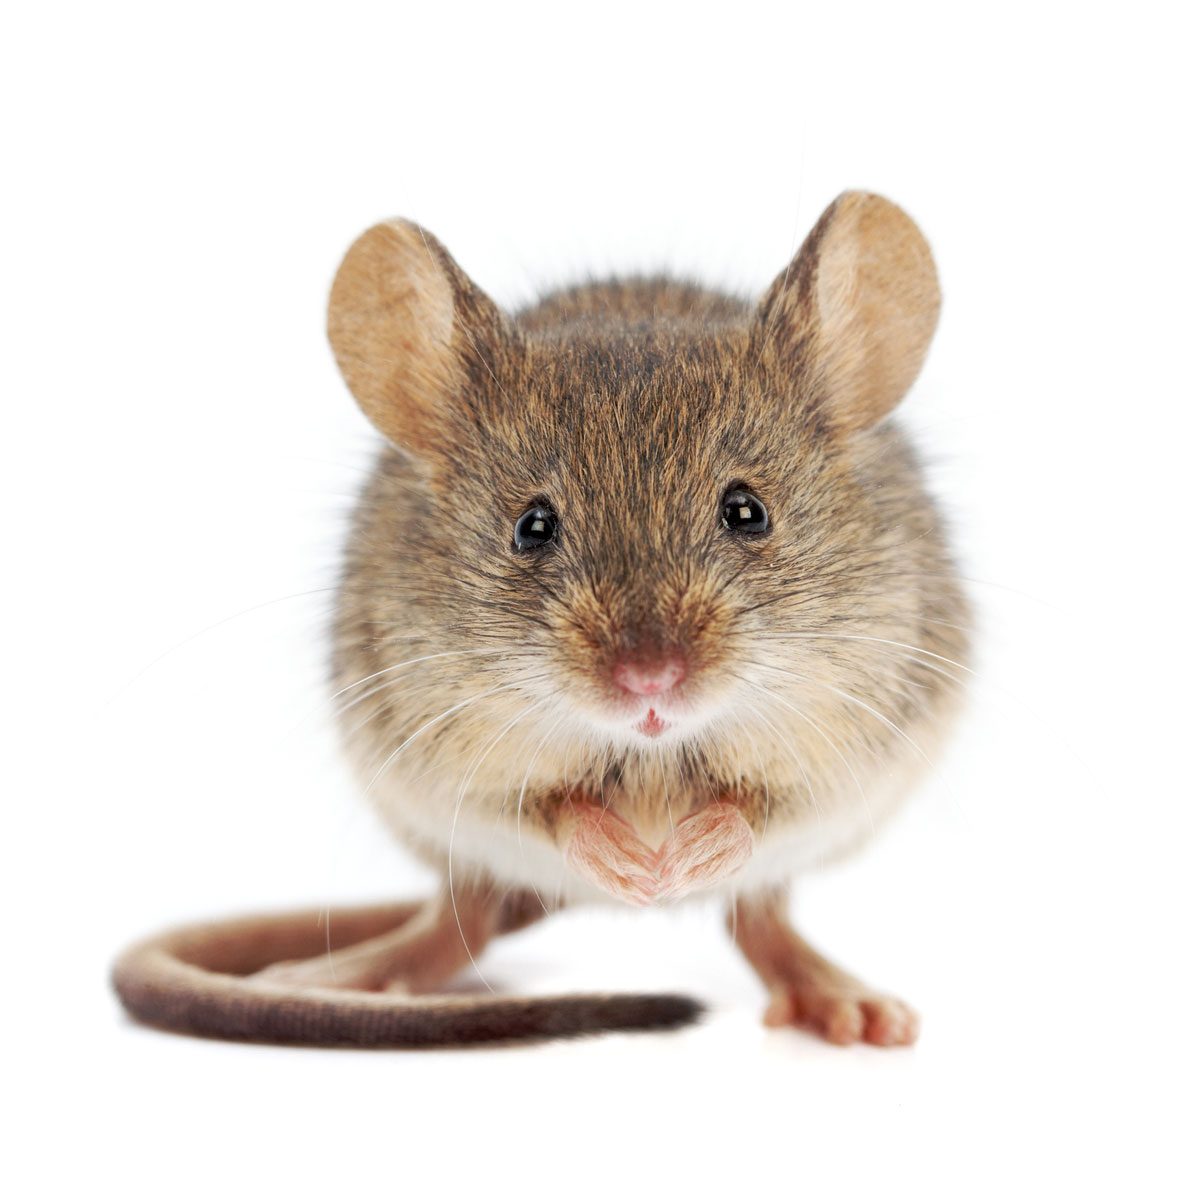 https://www.familyhandyman.com/wp-content/uploads/2020/12/house-mouse-GettyImages-480386986.jpg?fit=696%2C696